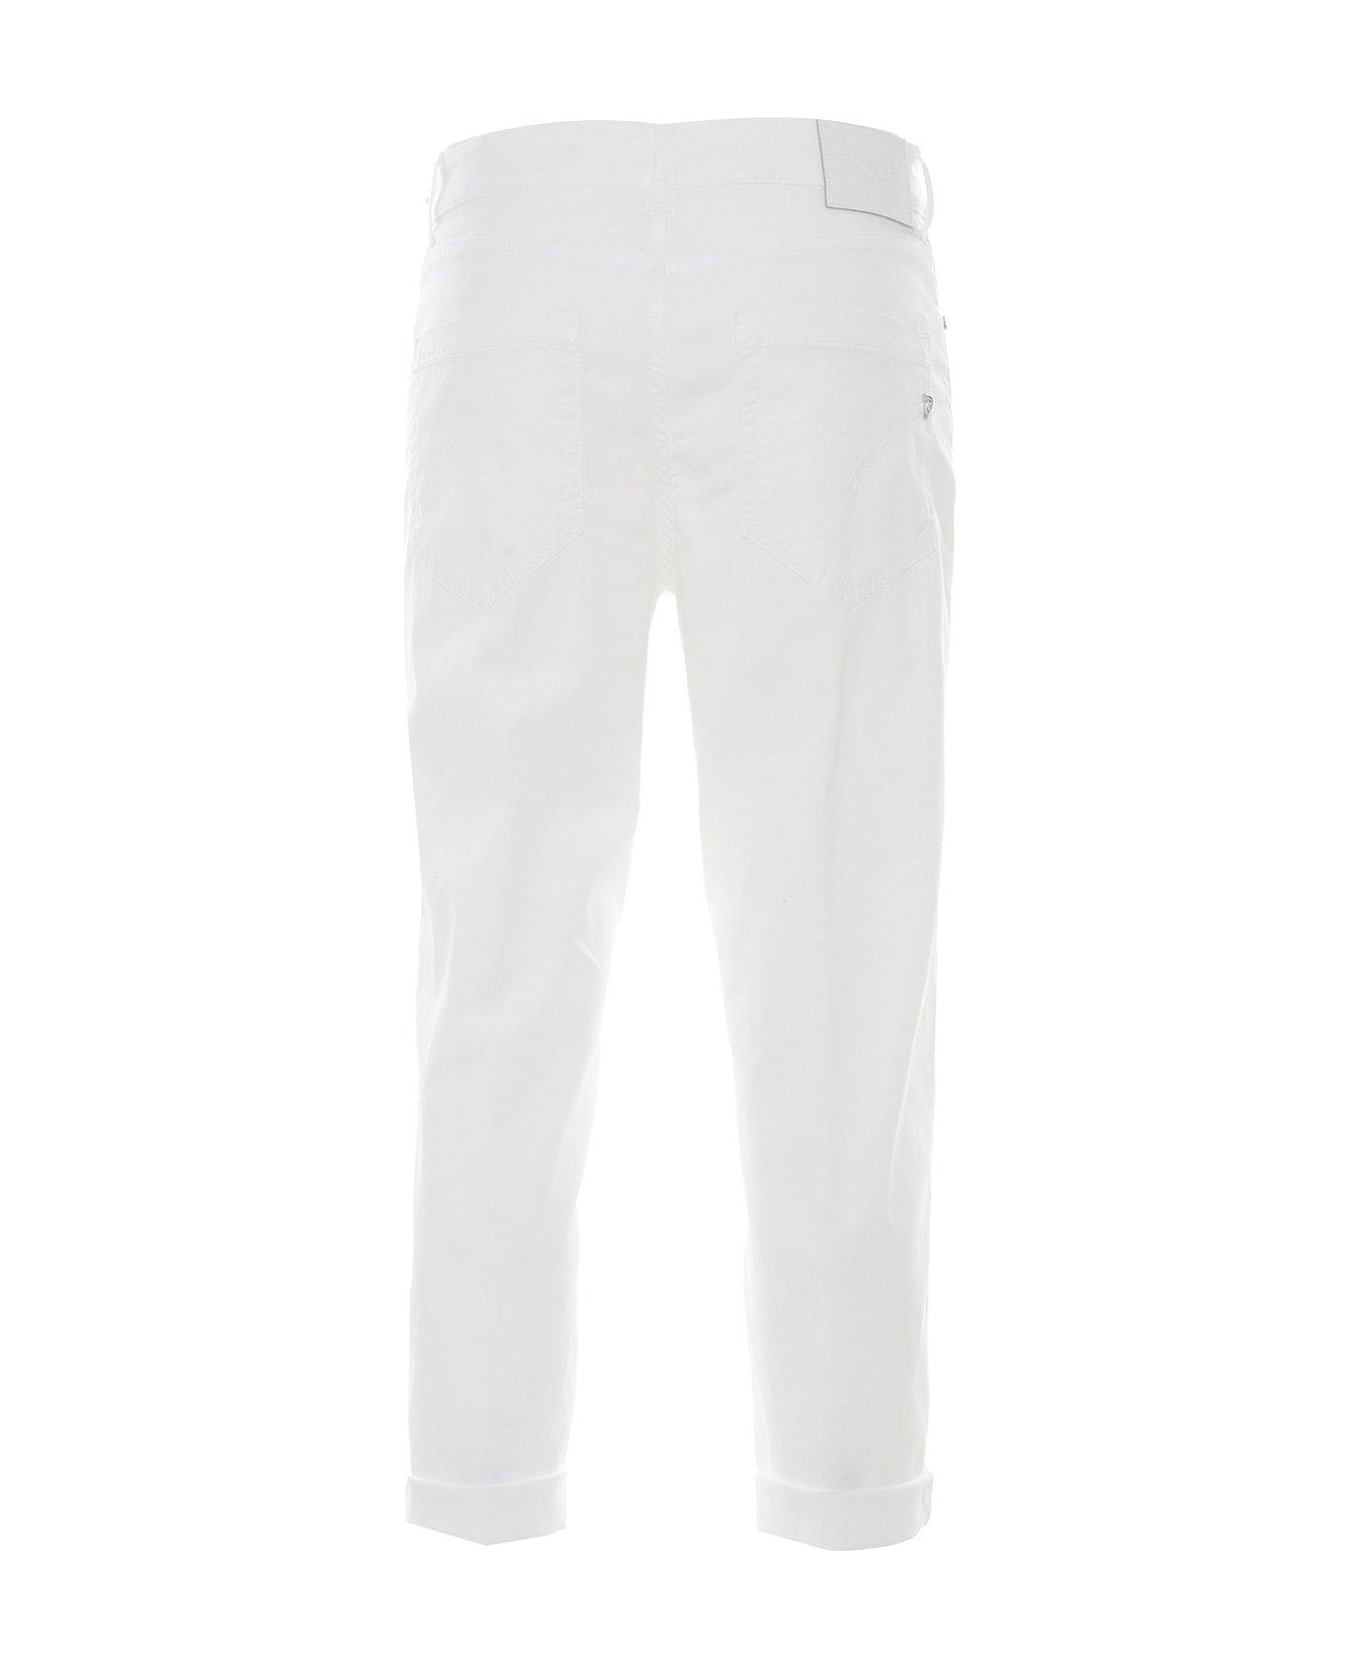 Dondup Logo-patch Cropped Jeans - White